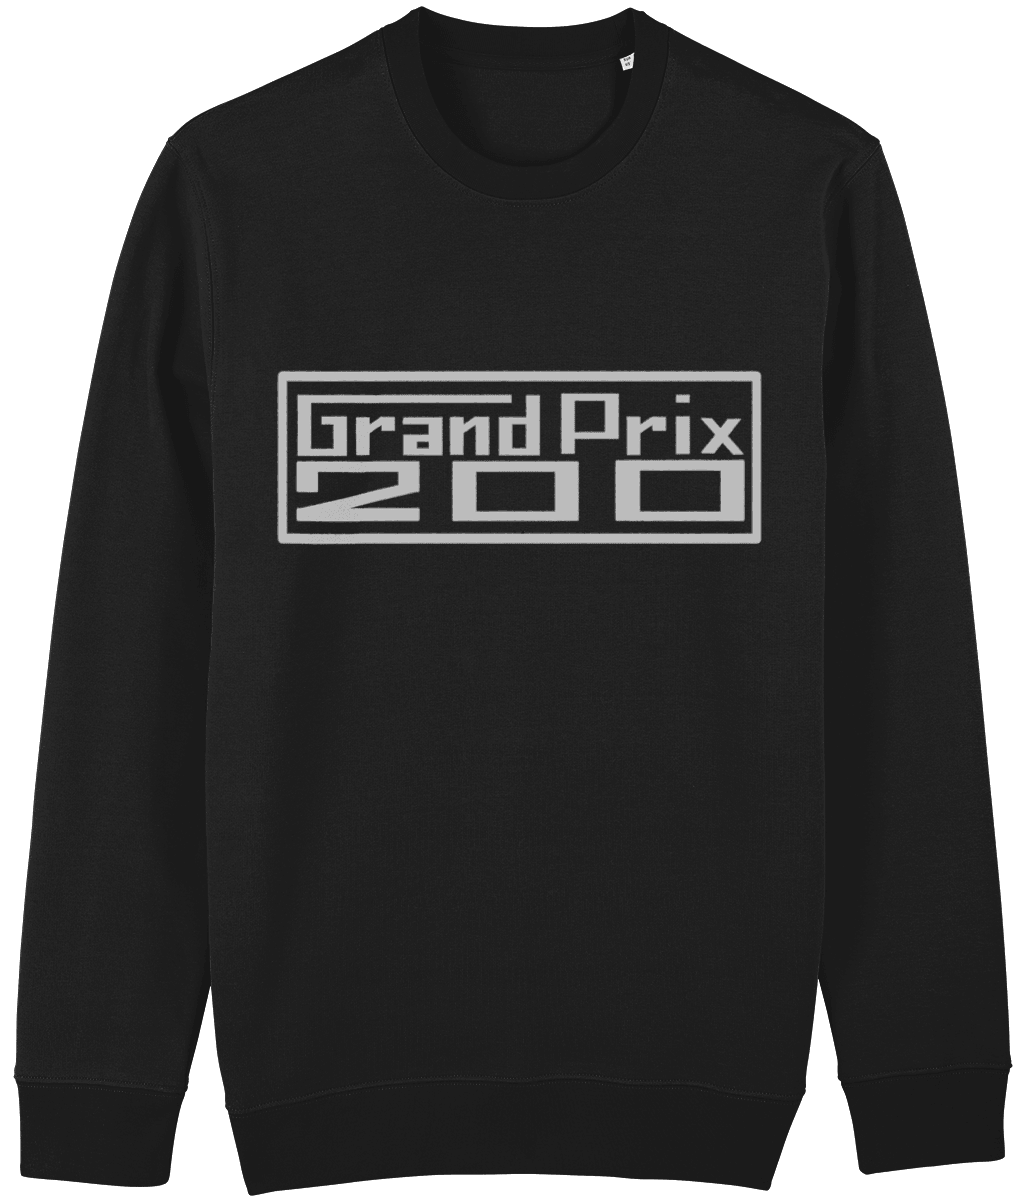 GRAND PRIX 200: Swaetahirt Inspired by Classic Lambretta Scooters (Silver Badge) - SOUND IS COLOUR, GP200